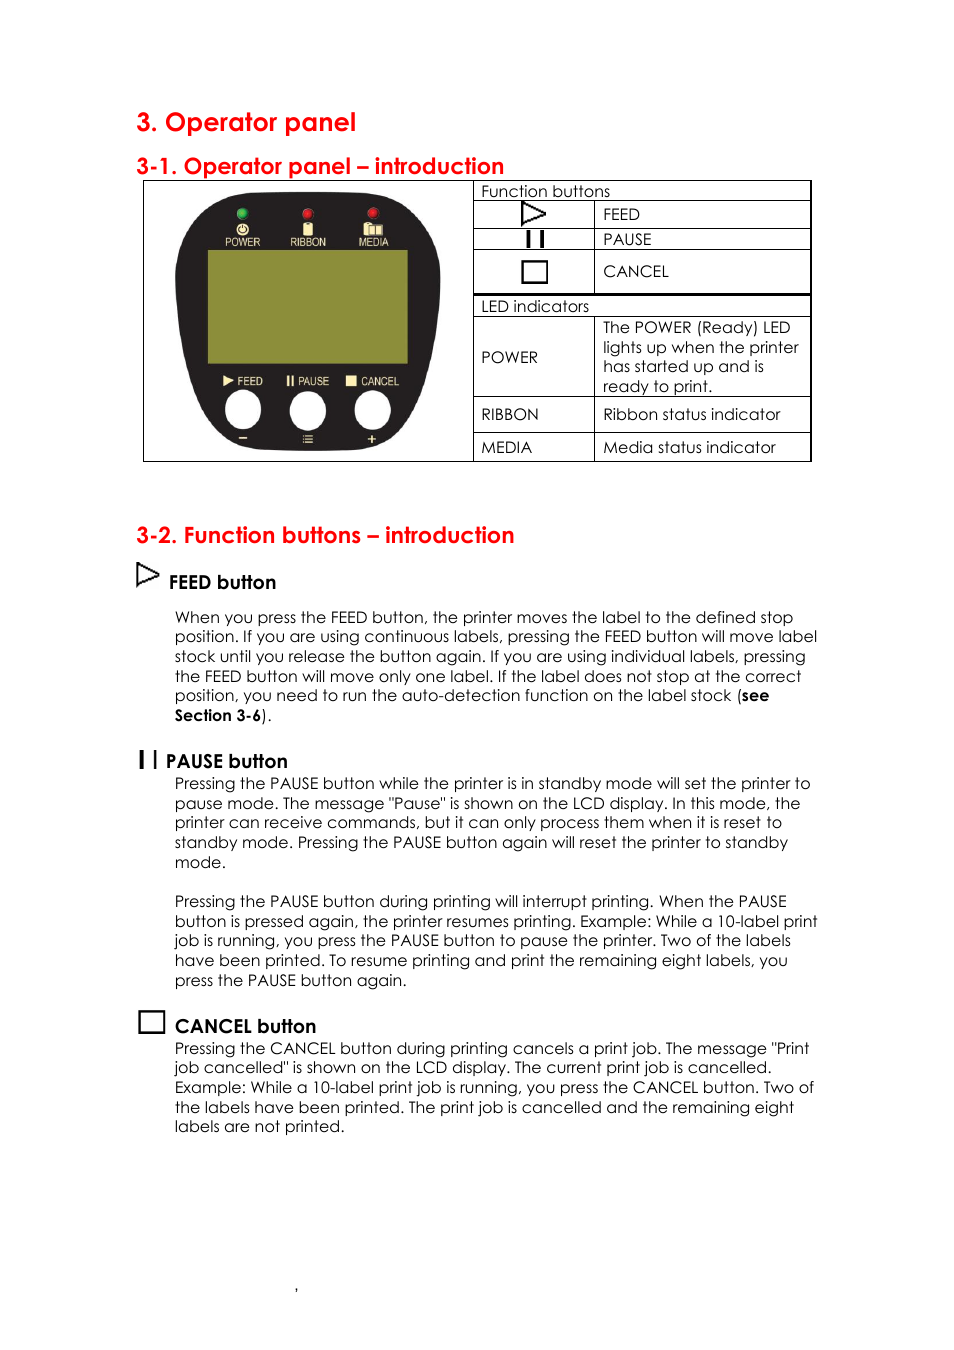 Operator panel, 1. operator panel – introduction, 2. function buttons – introduction | GoDEX EZ6000Plus series User Manual | Page 21 / 67